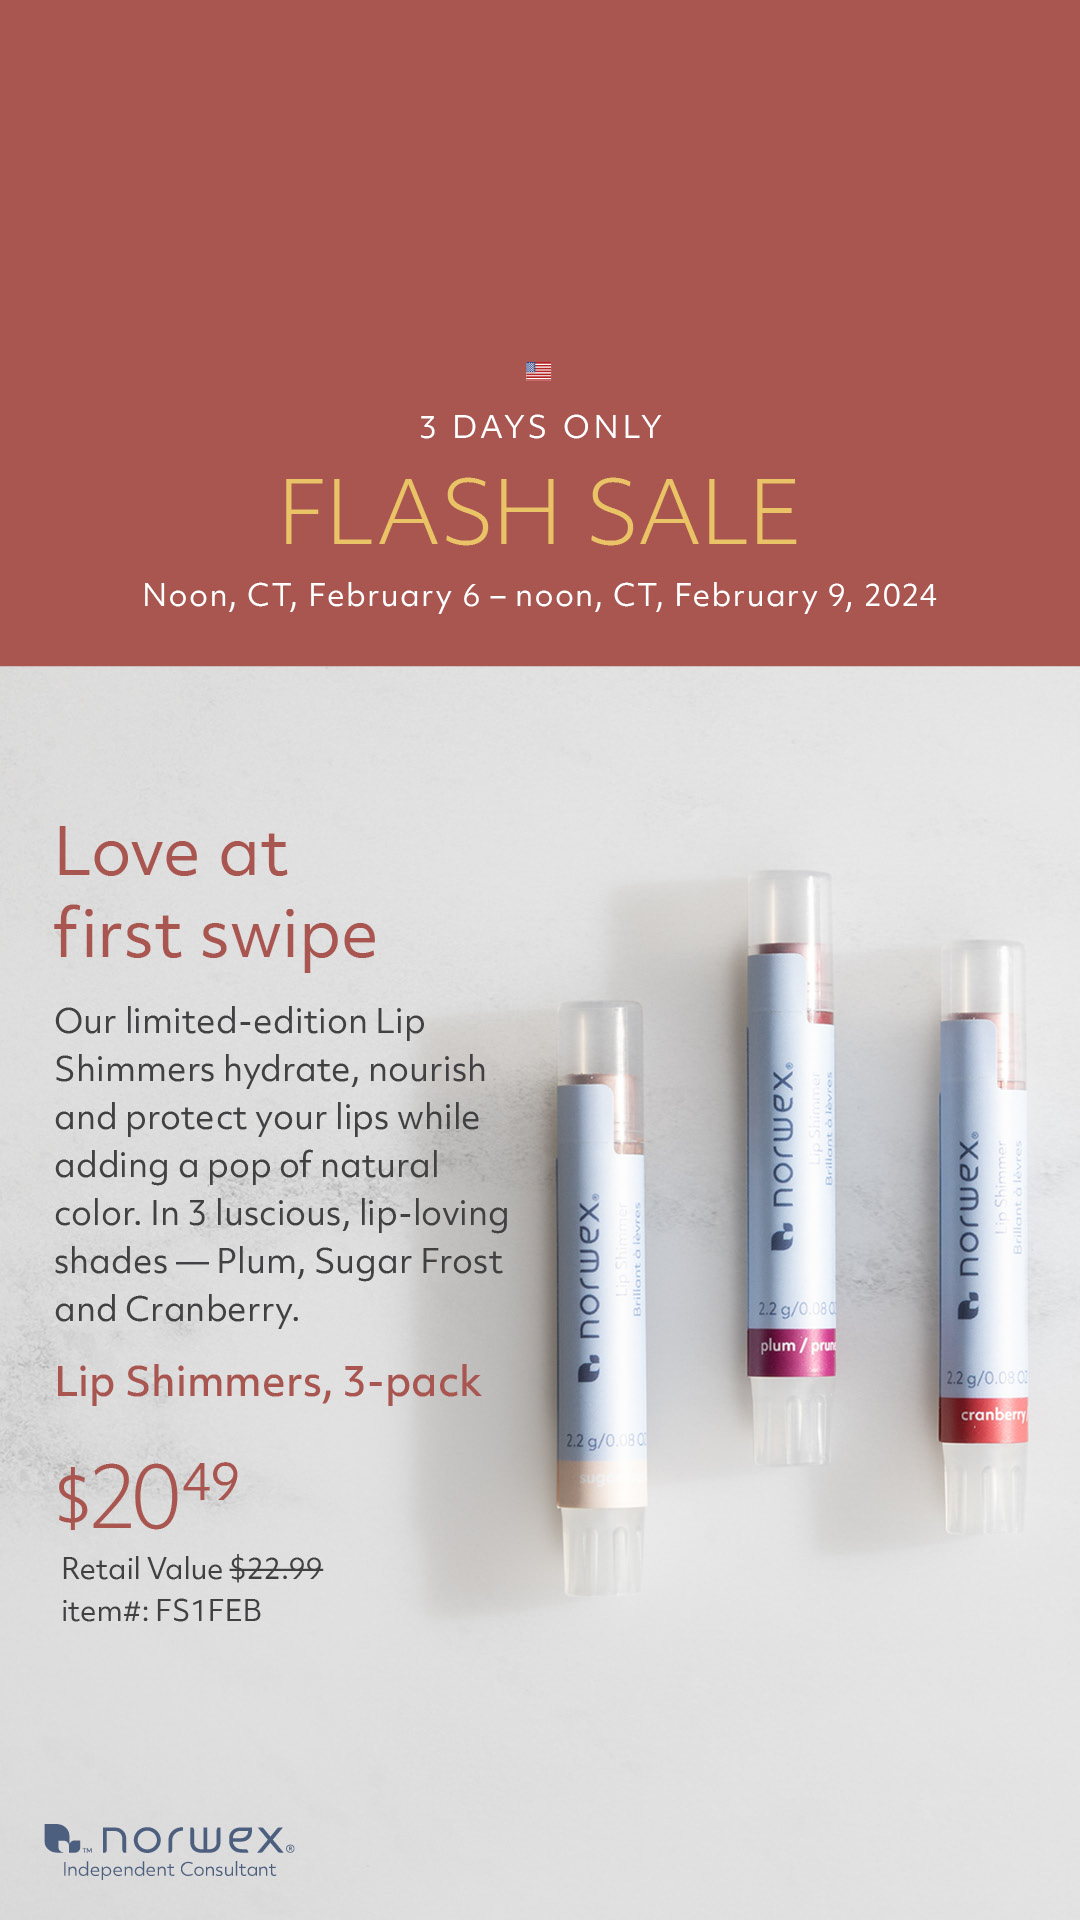 Norwex Lip Shimmers | Norwex Flash Sale February 6 - 9, 2024